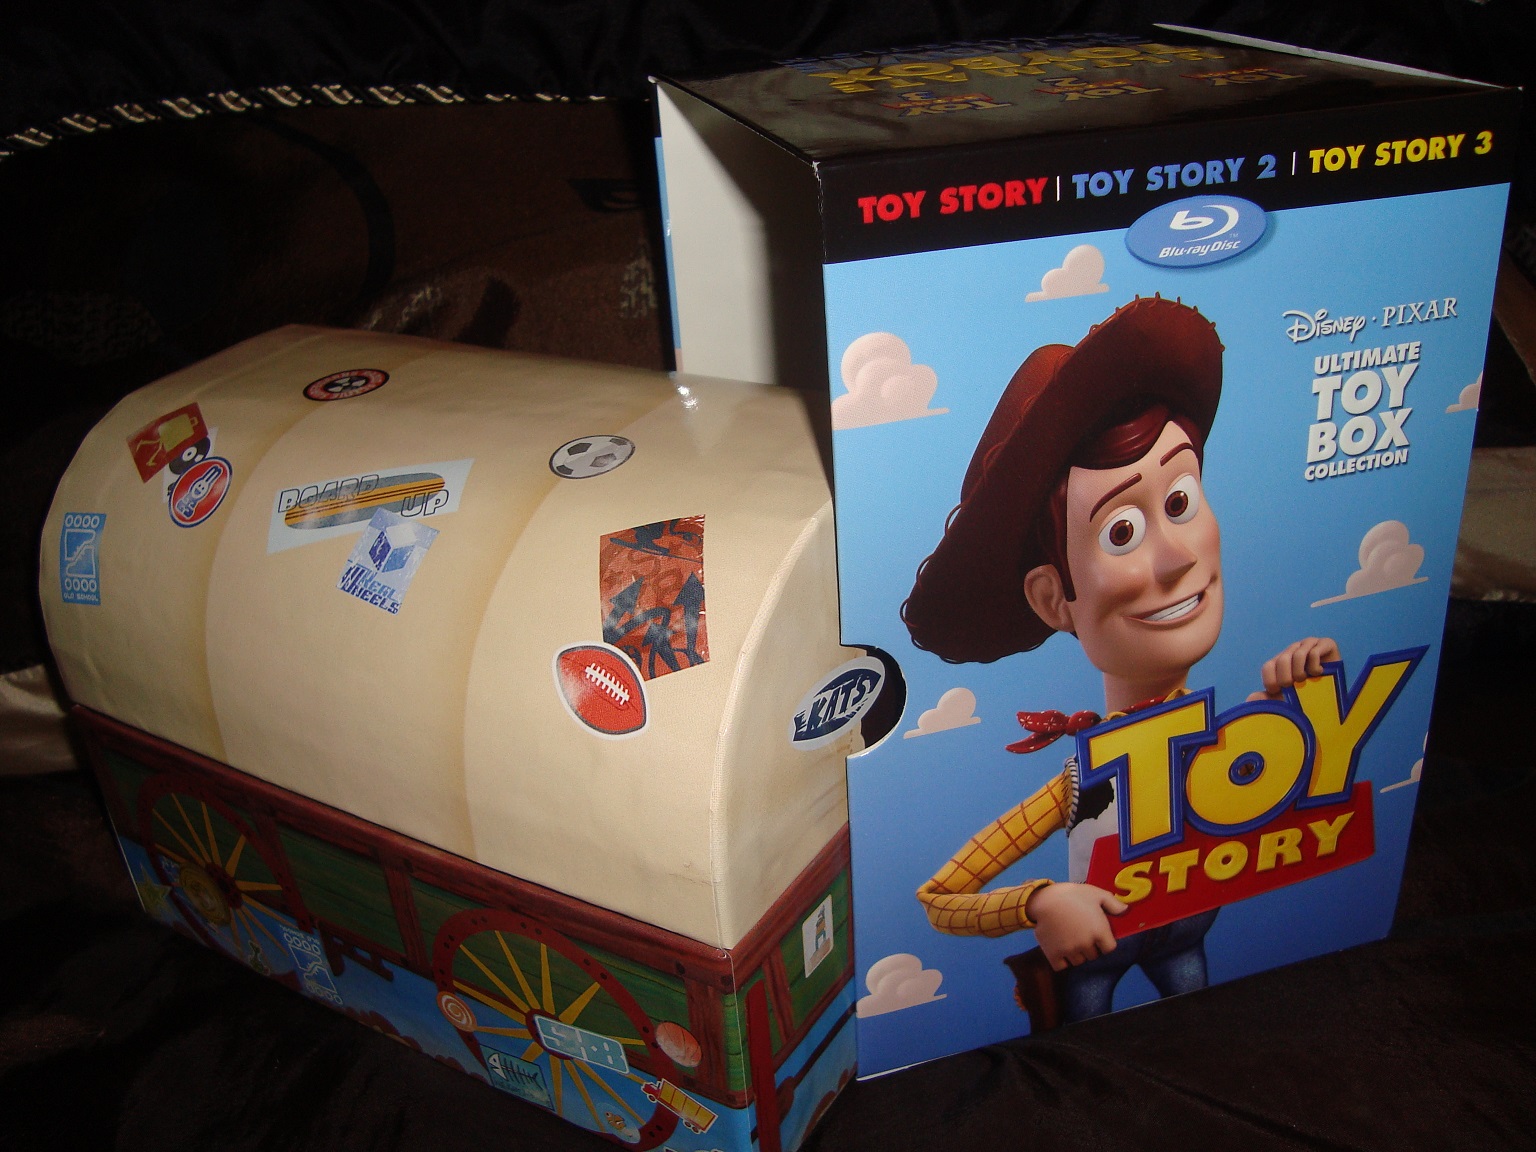 Toy Story Trilogy Toy Box Edition